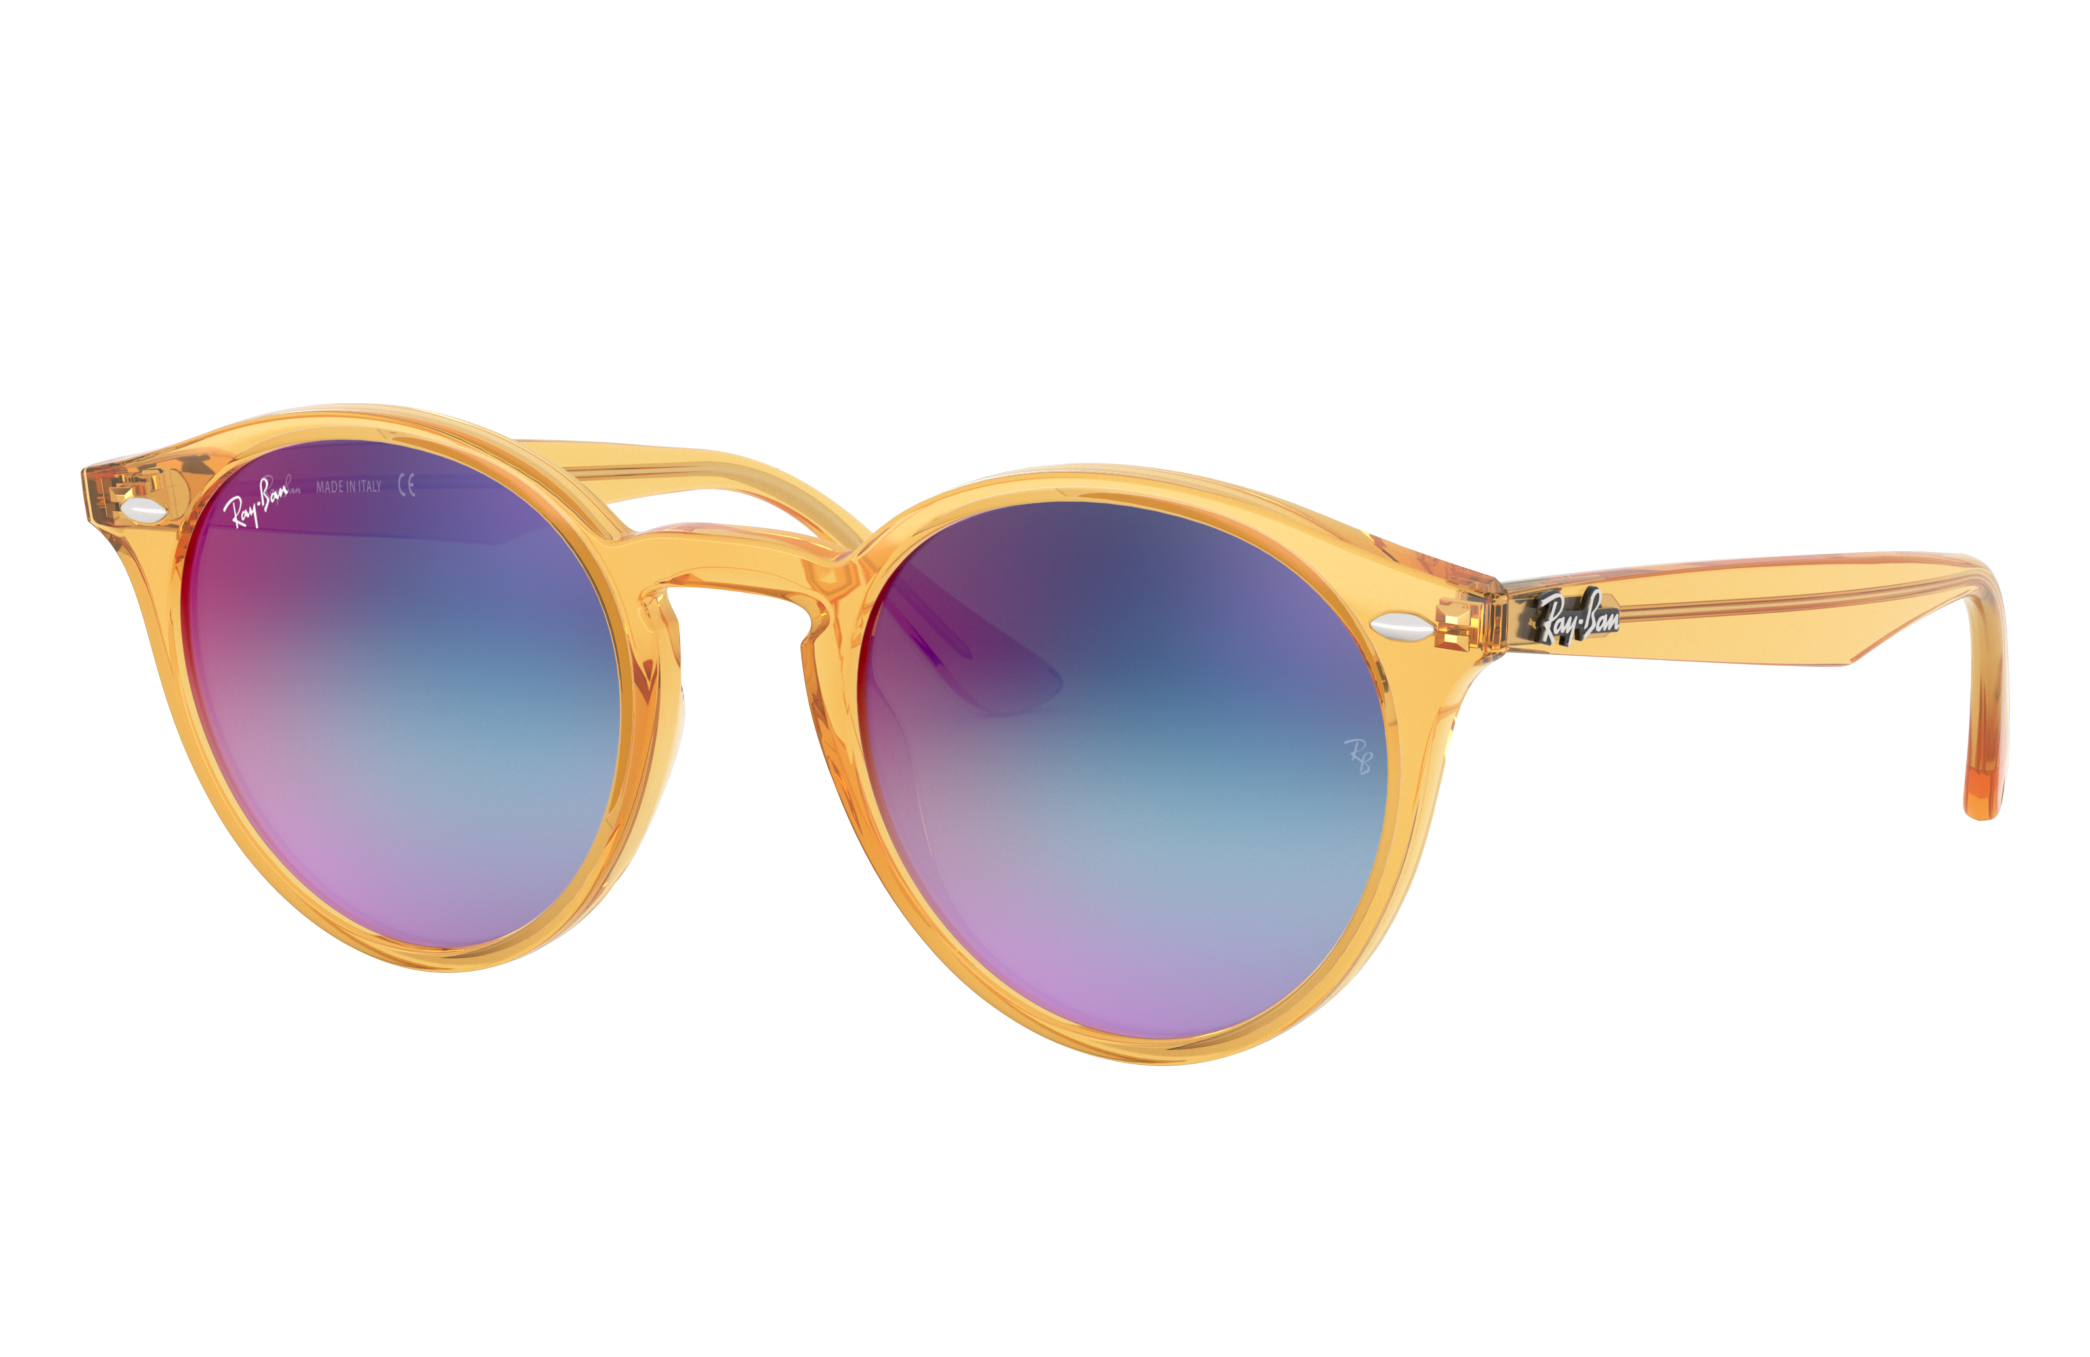 Rb2180 Sunglasses in Yellow and Blue/Violet | Ray-Ban®